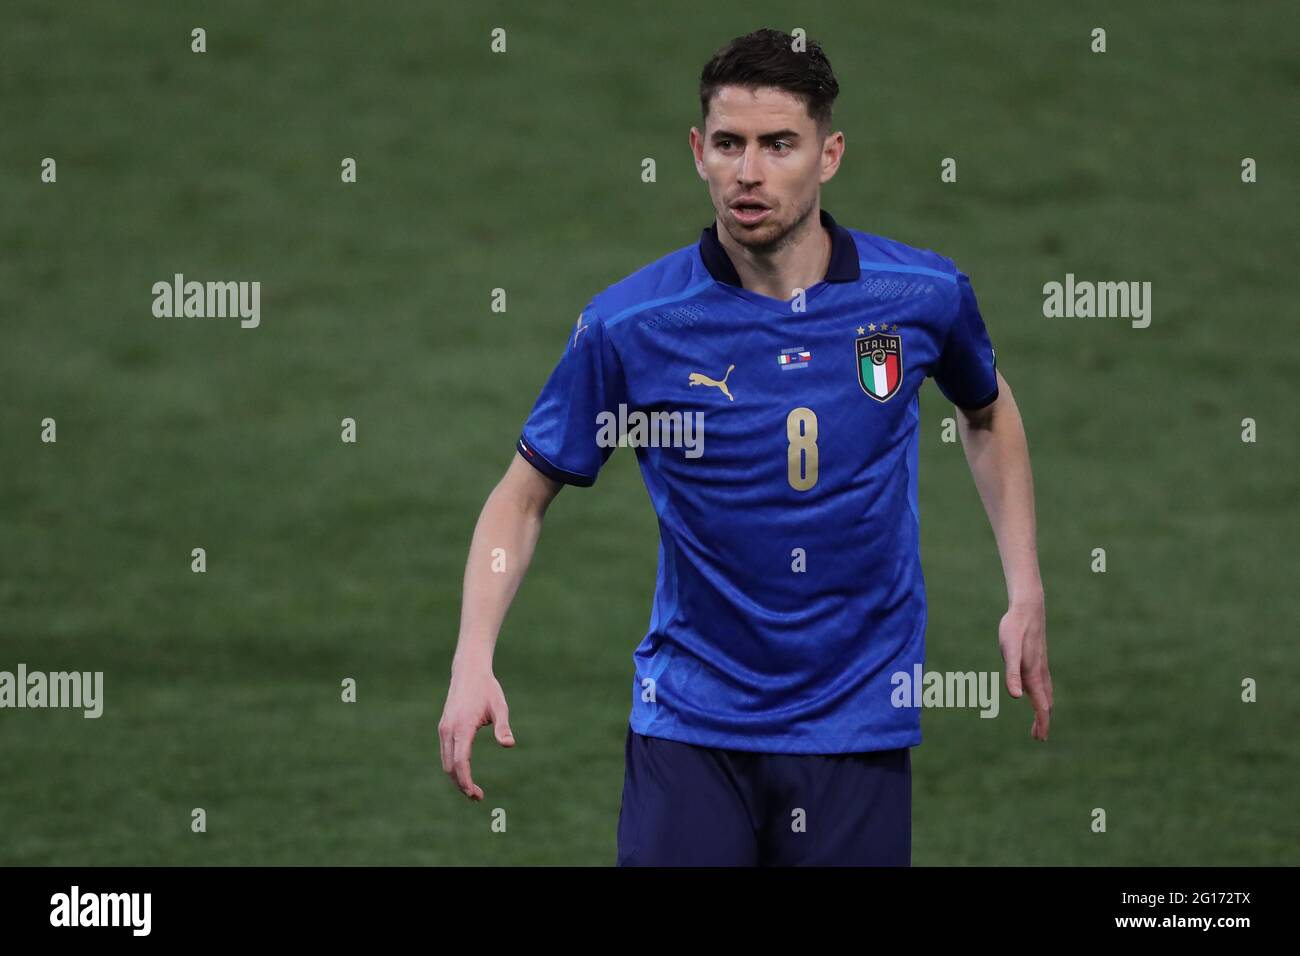 Bologna, Italy, 4th June 2021. Jorginho of Italy during the International Football Friendly match at Stadio Dall'Ara, Bologna. Picture credit should read: Jonathan Moscrop / Sportimage Stock Photo